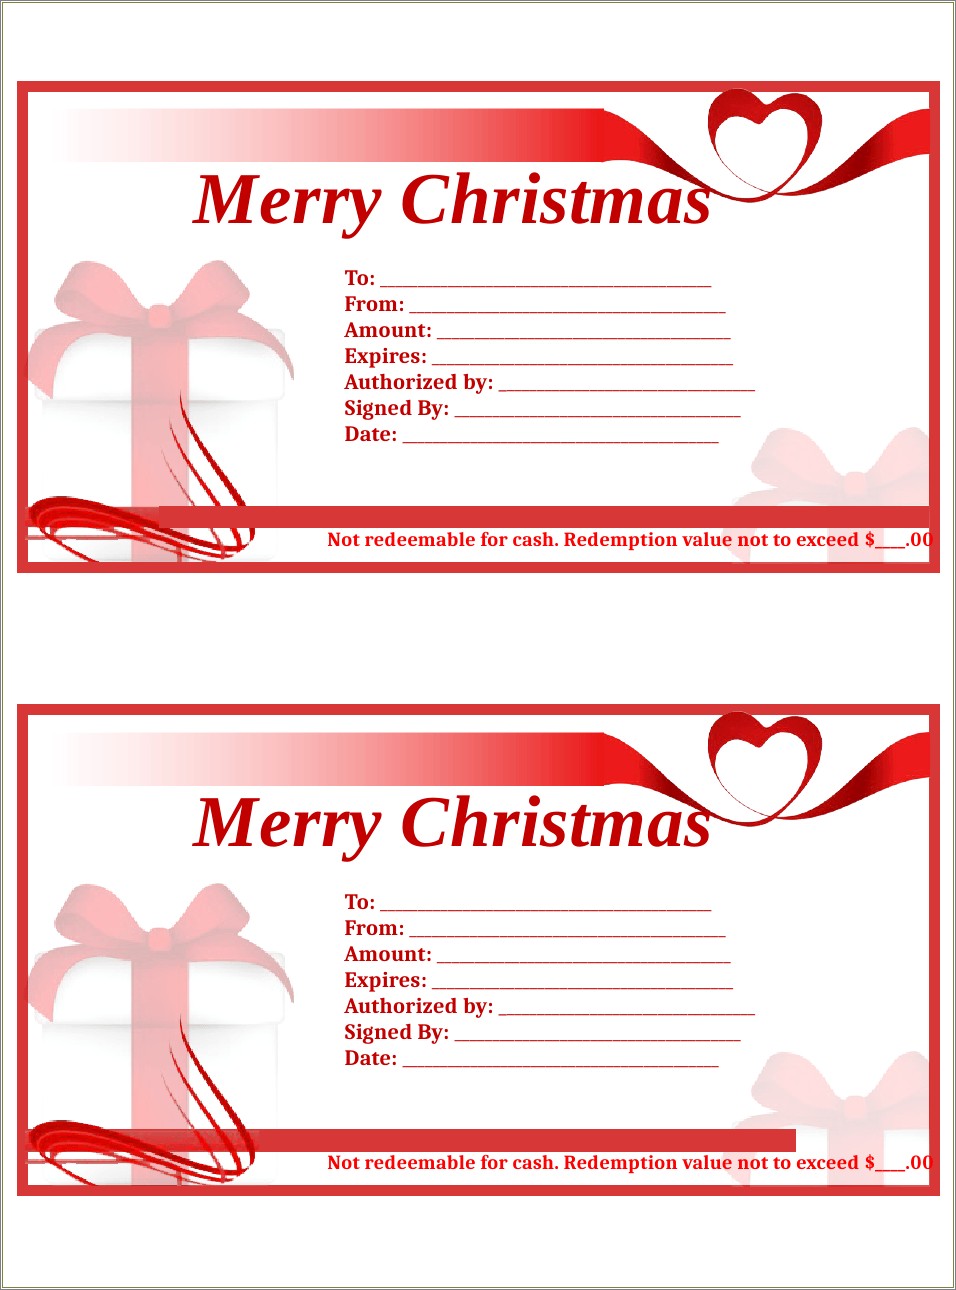 Free Printable Gift Certificate Templates For Christmas